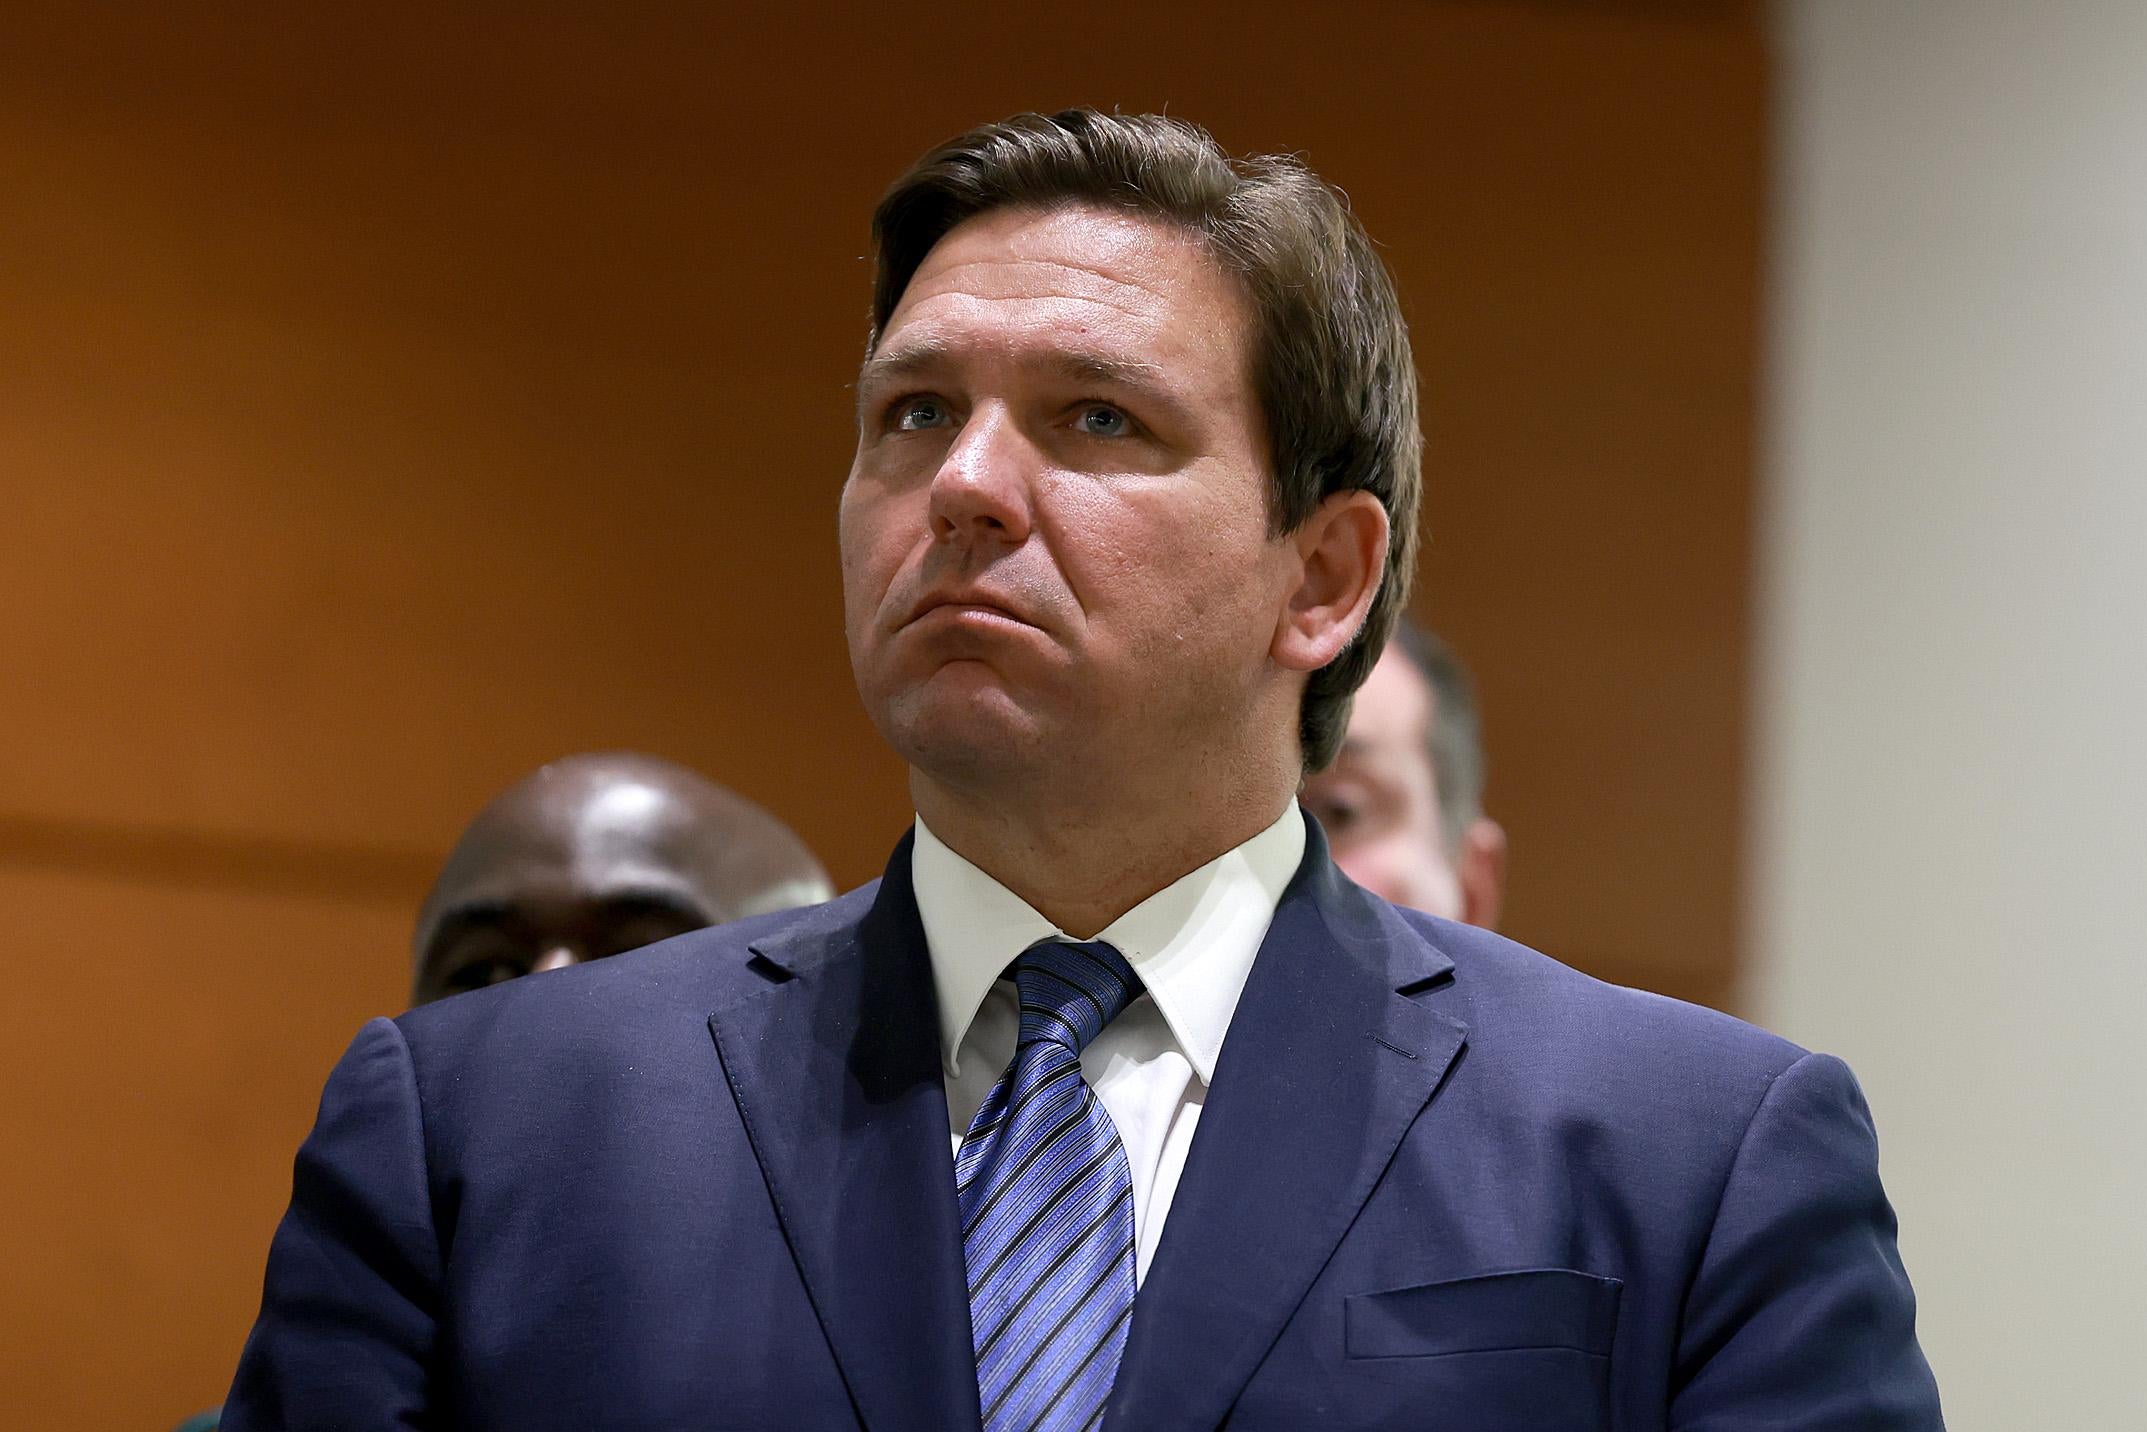 Ron DeSantis looking up, questioningly